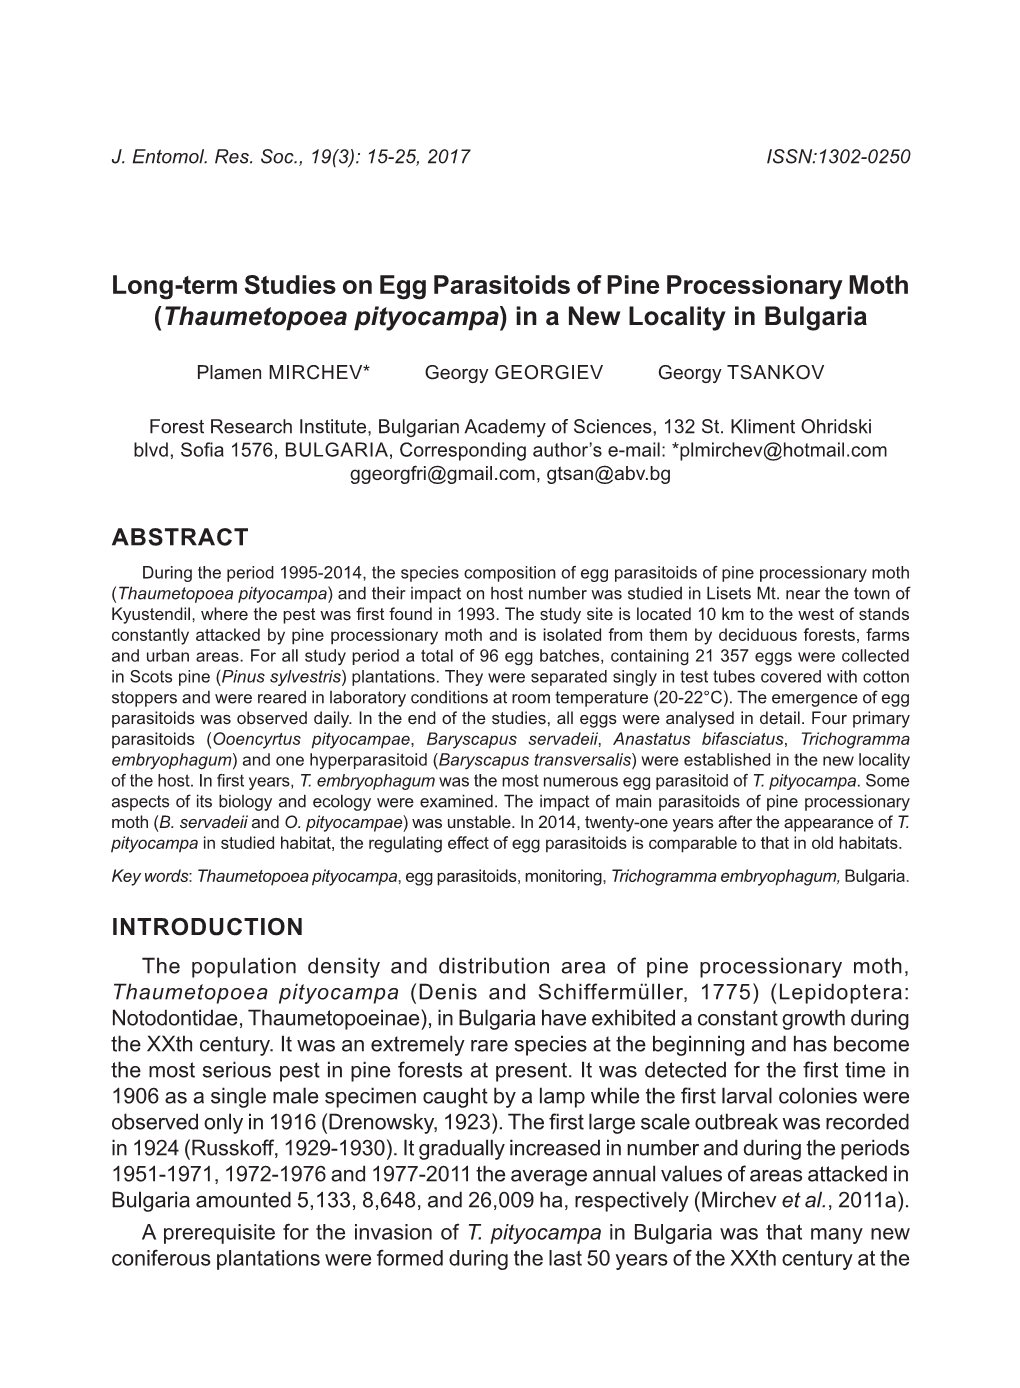 Long-Term Studies on Egg Parasitoids of Pine Processionary Moth (Thaumetopoea Pityocampa) in a New Locality in Bulgaria